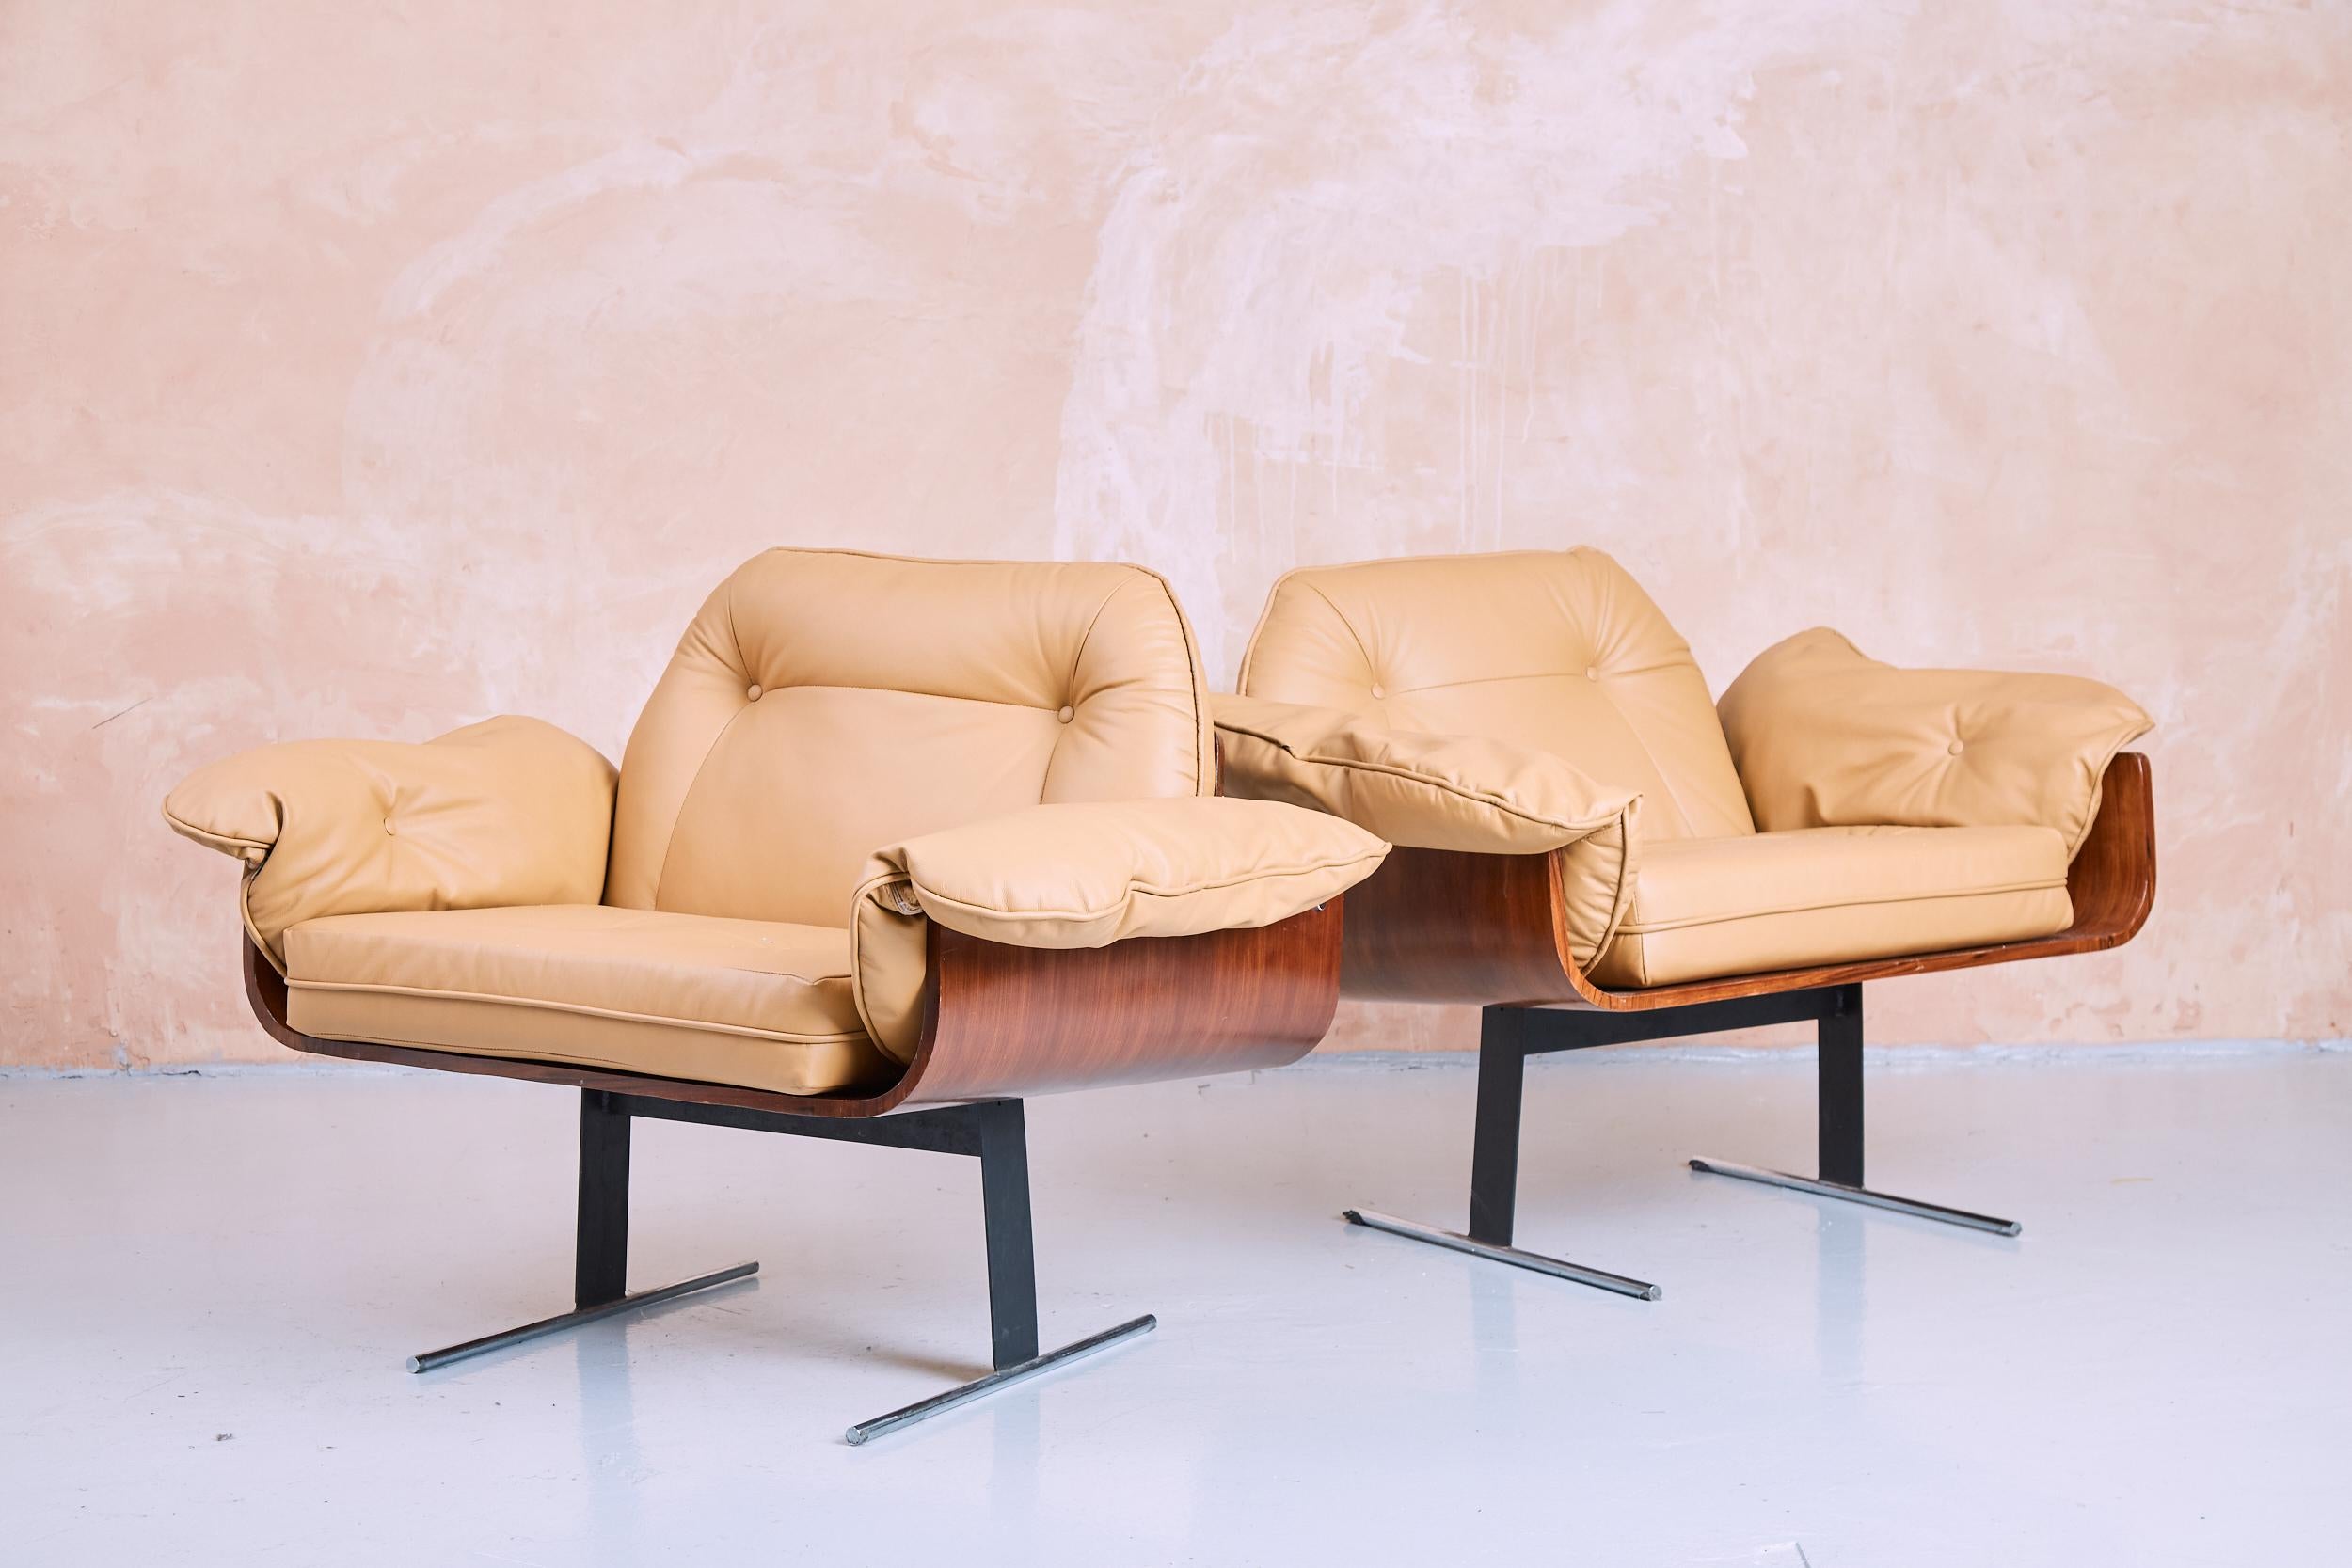 Pair of Brazilian 'Presidencial' Lounge Chairs by Jorge Zalszupin for L'Atelier In Good Condition For Sale In London, GB